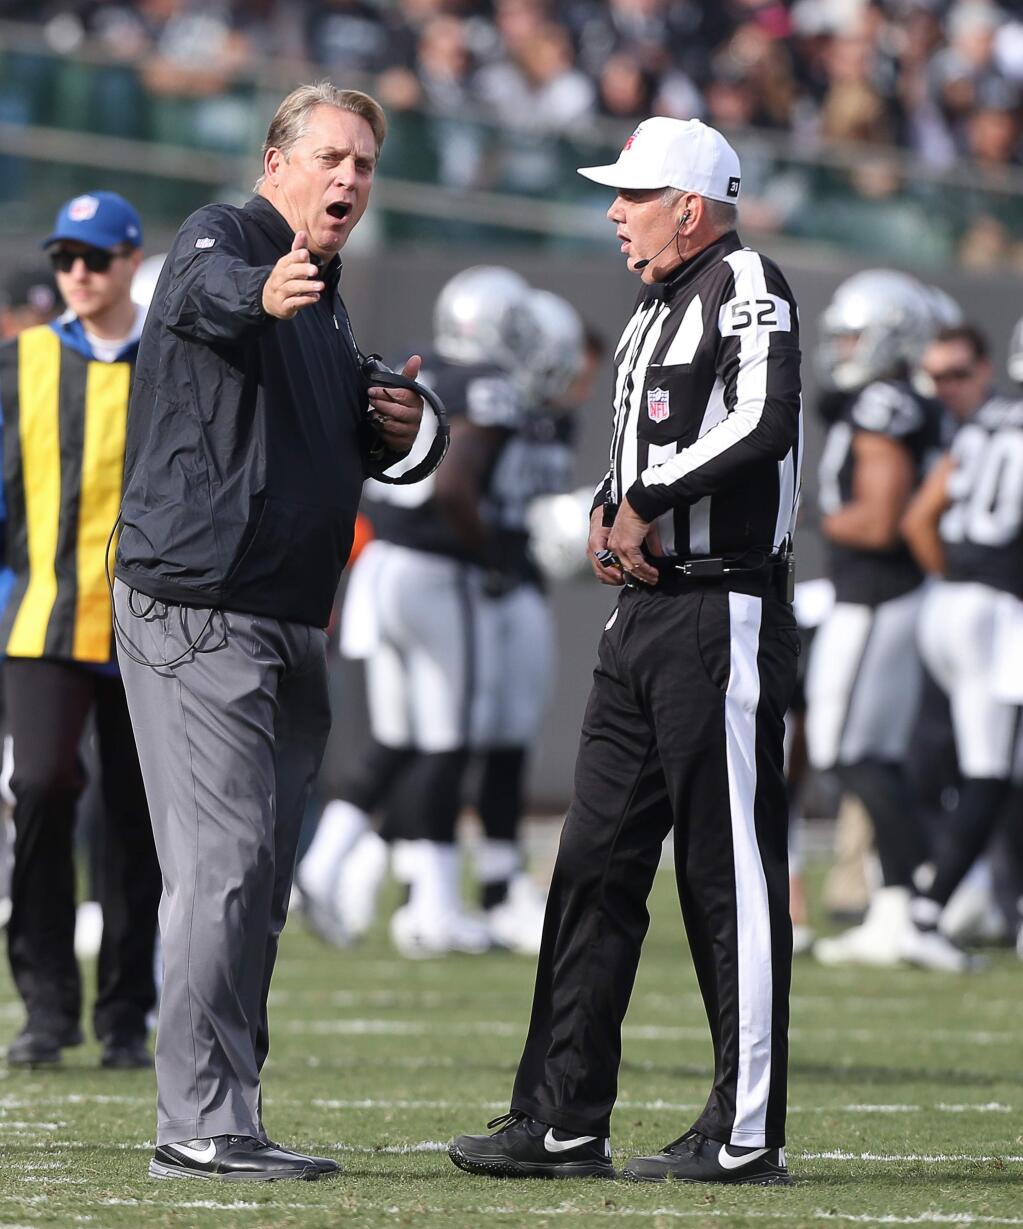 Oakland Raiders head coach Jack Del Rio argues a call during their game against the Buffalo Bills in Oakland on Sunday, December 4, 2016. The Raiders defeated the Panthers 38-24. (Christopher Chung/ The Press Democrat)